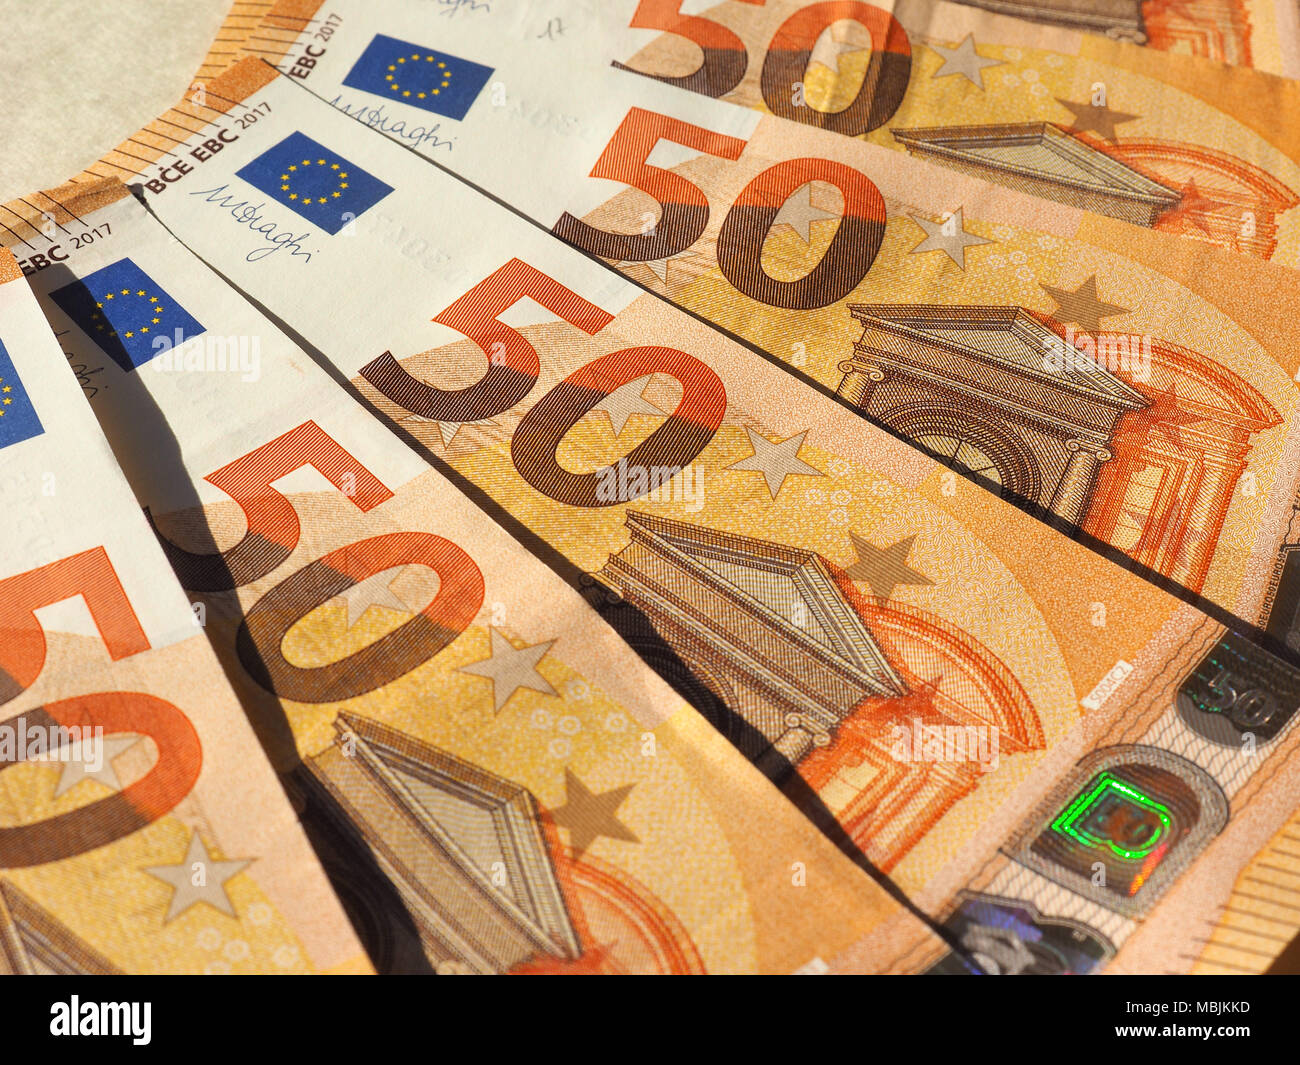 Fifty Euro Banknotes Money Eur Currency Of European Union Stock Photo Alamy